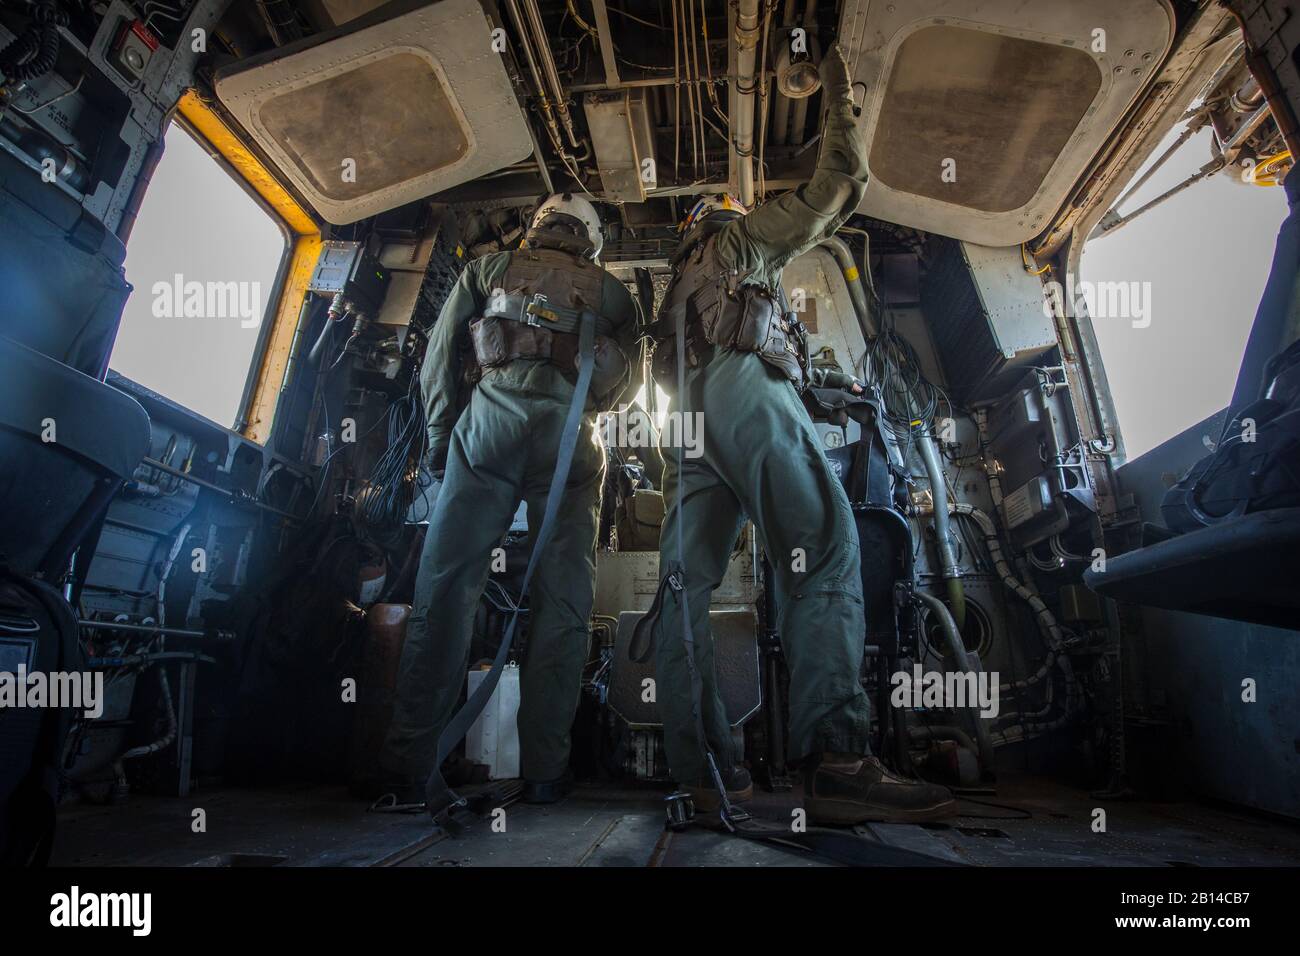 U.S. Marine Corps Lance Cpl. Mason DiNicola, left, and Cpl. Bradley Lauer, crew chiefs with Marine Heavy Helicopter Squadron (HMH) 466, look into a CH-53E Super Stallion cockpit during a tactical support insert and extract exercise in part of Weapons and Tactics Instructors course (WTI) 2-17 at Naval Air Facility El Centro, Calif., April 15, 2017. WTI is held biannually at Marine Corps Air Station (MCAS) Yuma, Ariz. to provide students with detailed training to be practiced on the various ranges in Arizona and California. (U.S. Marine Corps photo by Cpl. Trever A. Statz) Stock Photo